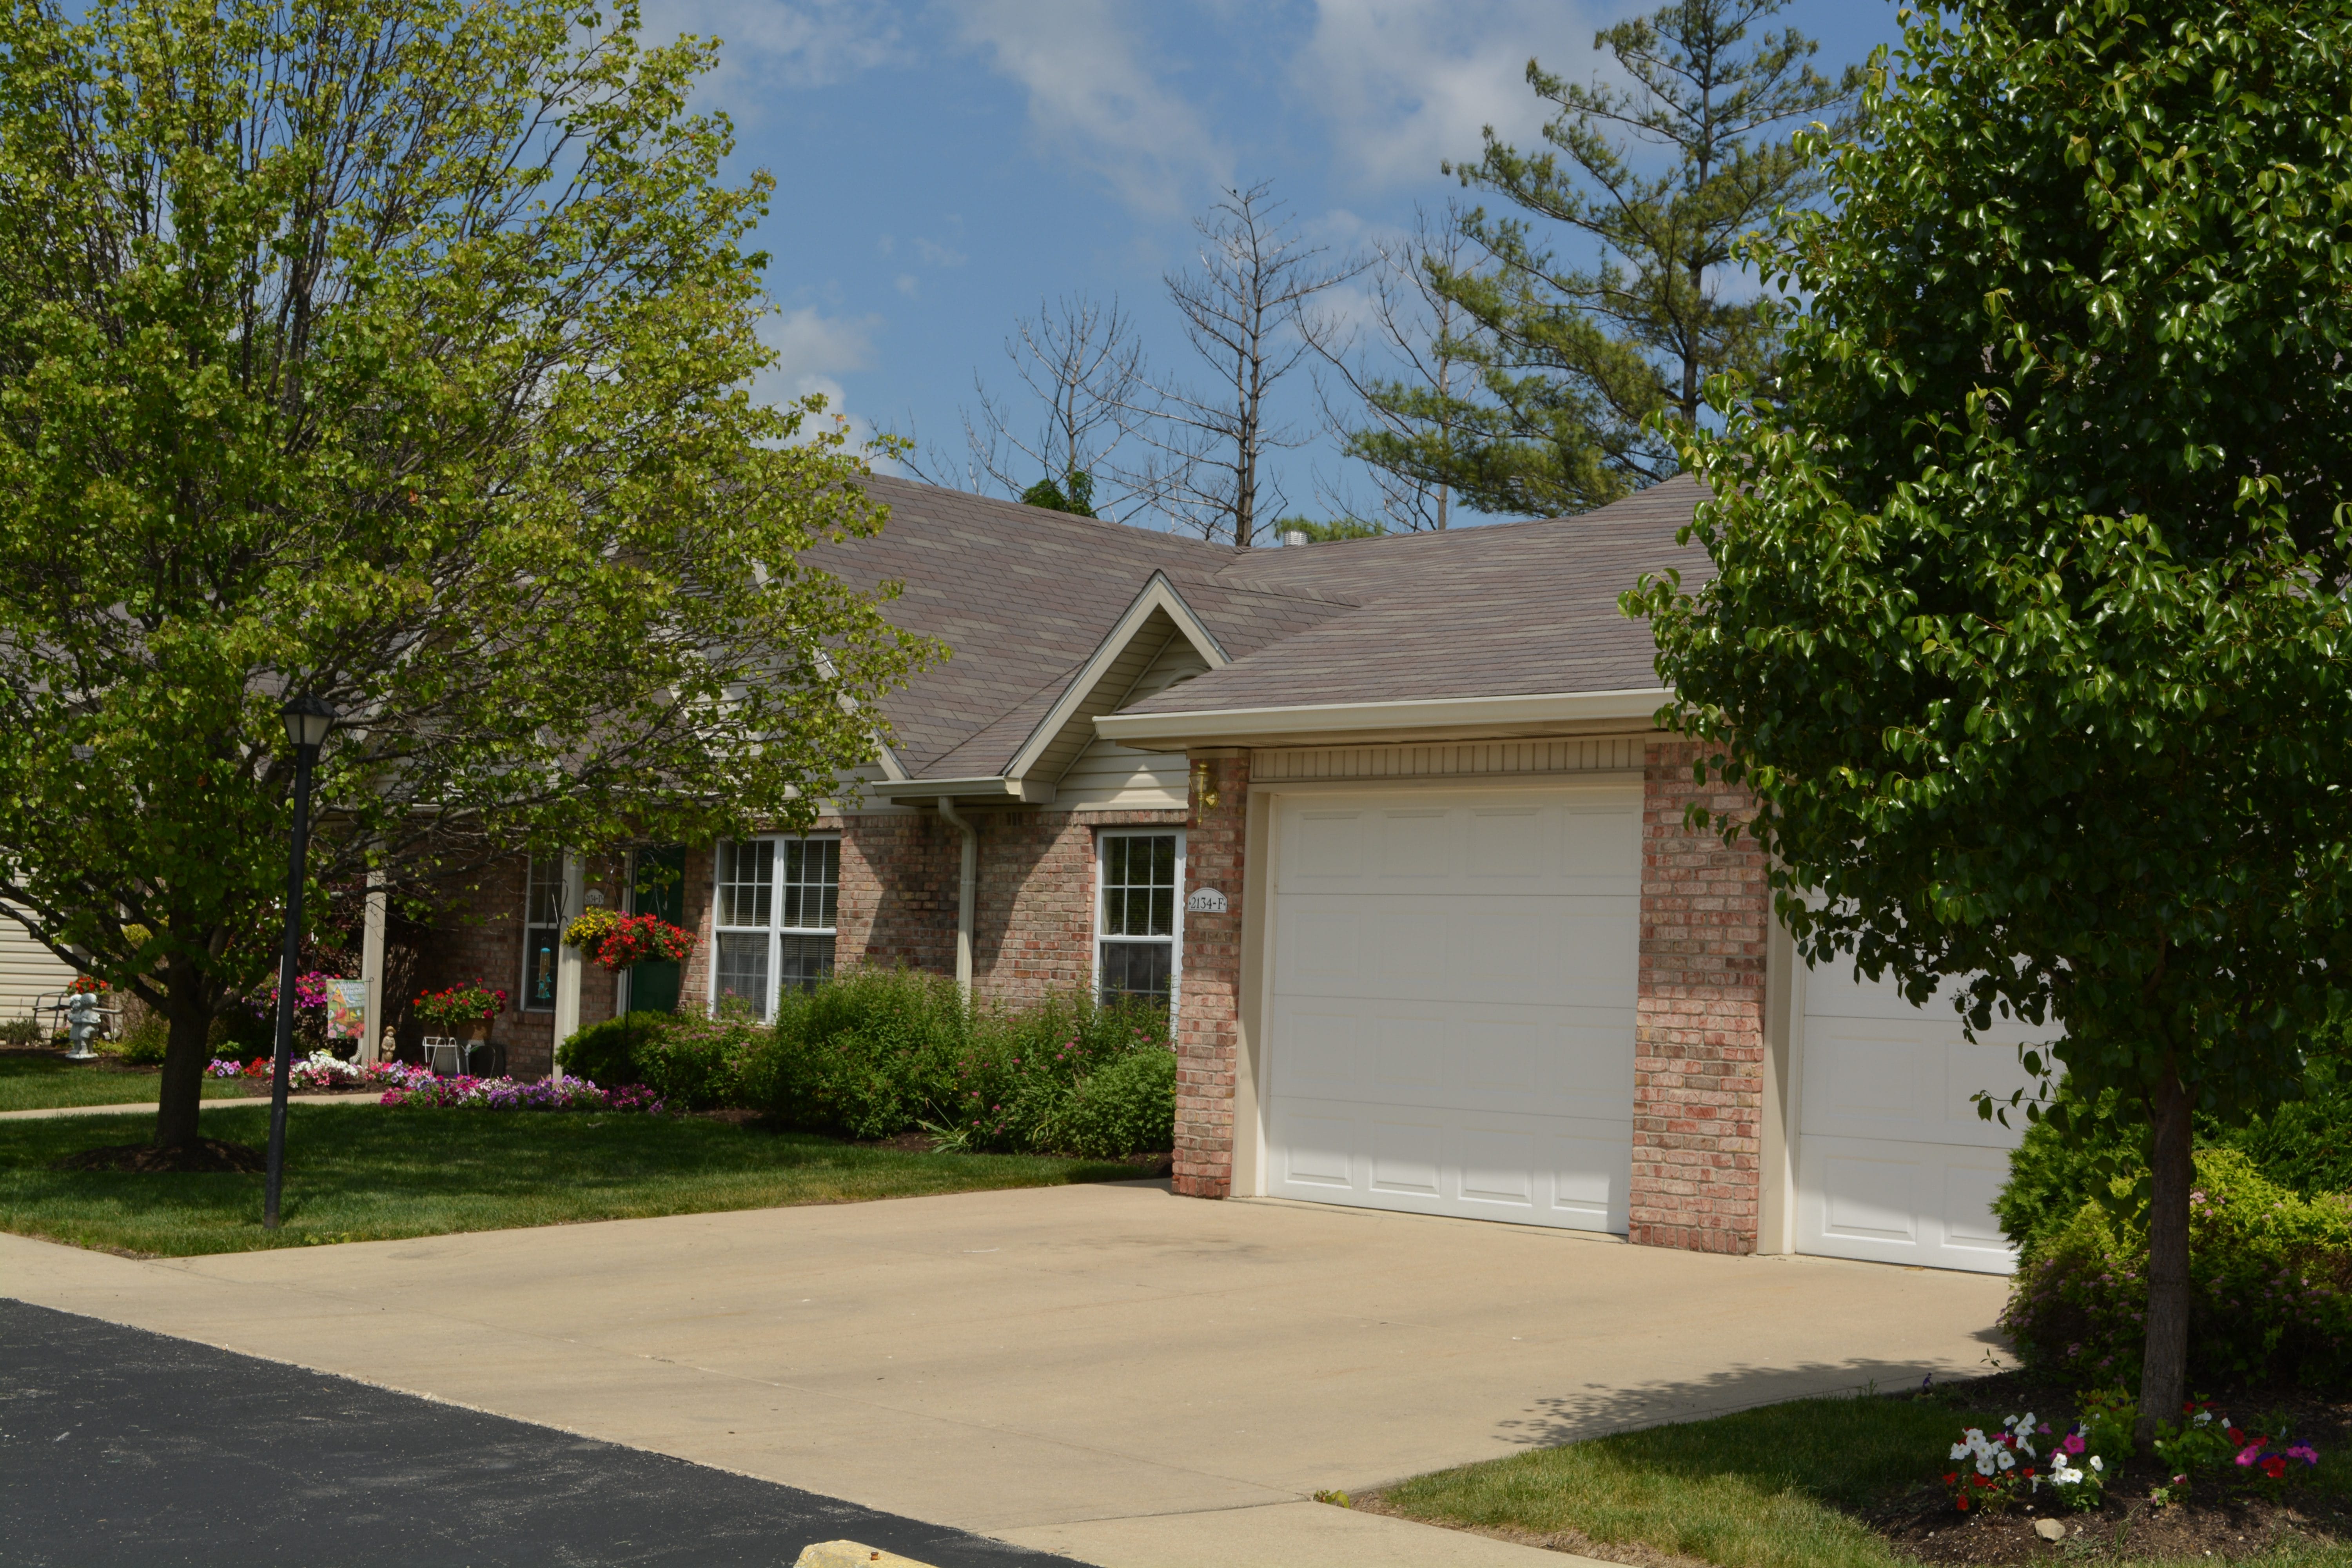 <span  class="uc_style_uc_tiles_grid_image_elementor_uc_items_attribute_title" style="color:#000000;">Two-door garage attachments at Spring Mill Meadows.</span>